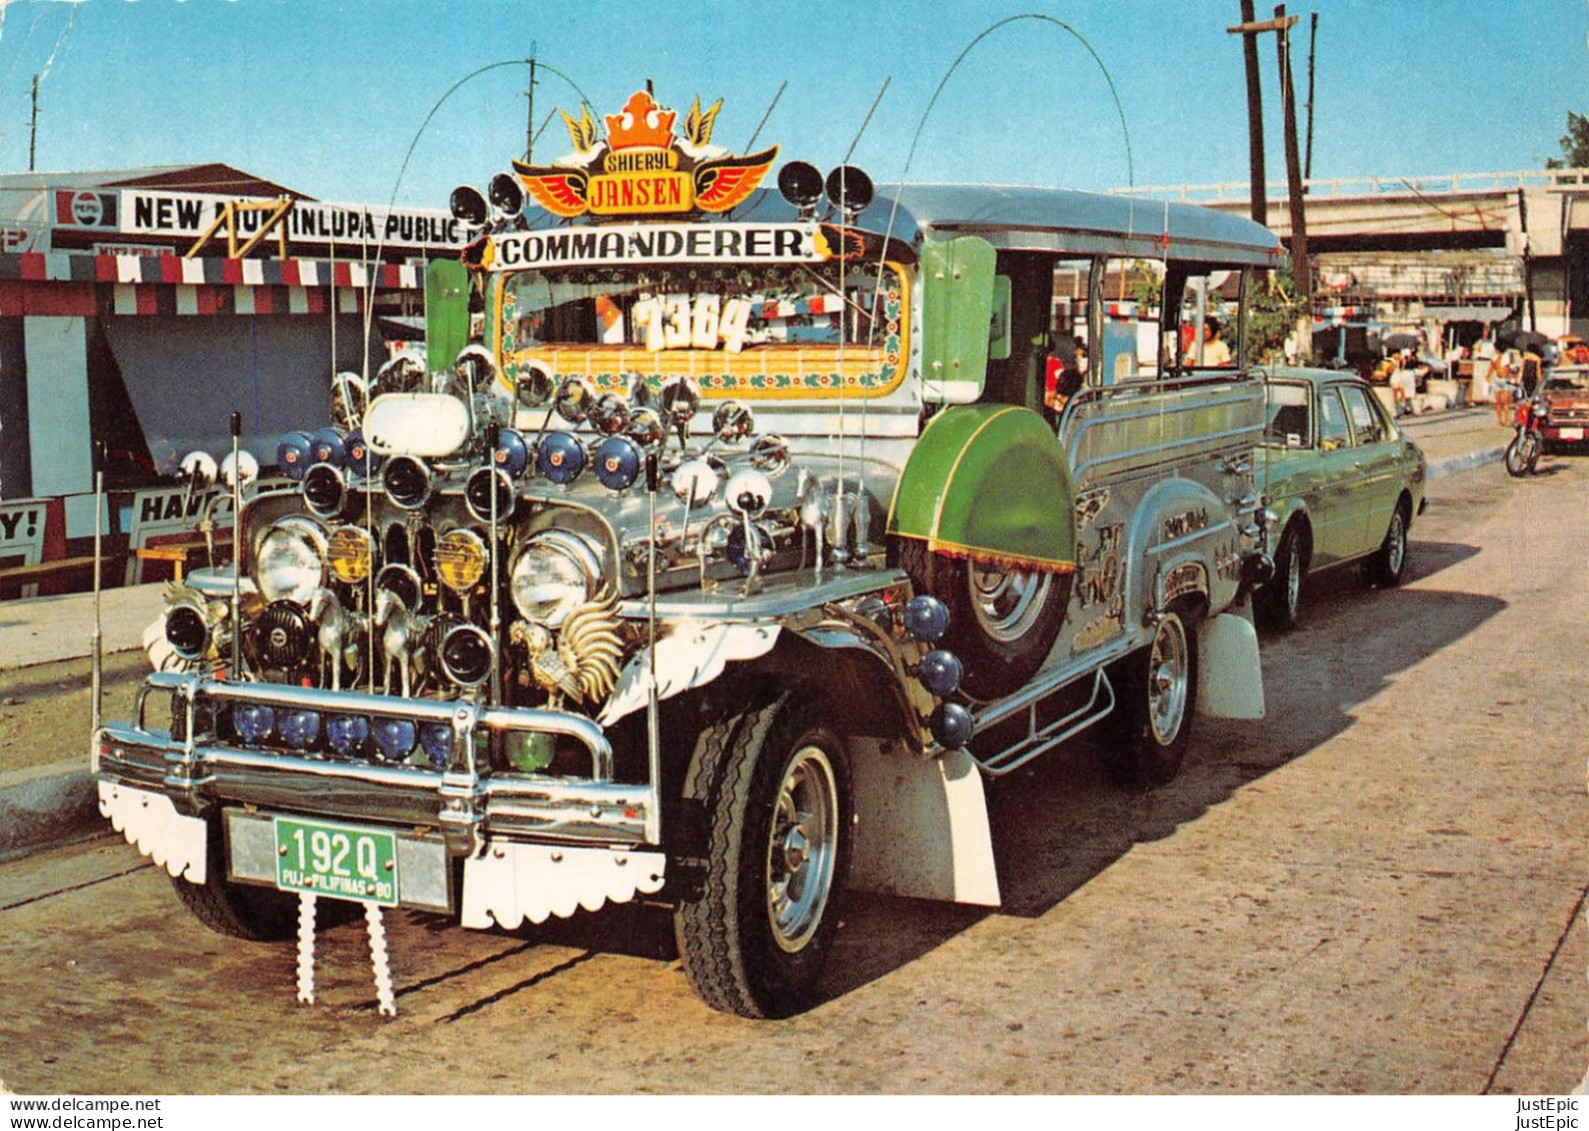 Philippines / Manille - Automobiles - The Philippine Jeepney - Distributed By National Book Store - 1983 Cpm - Philippines